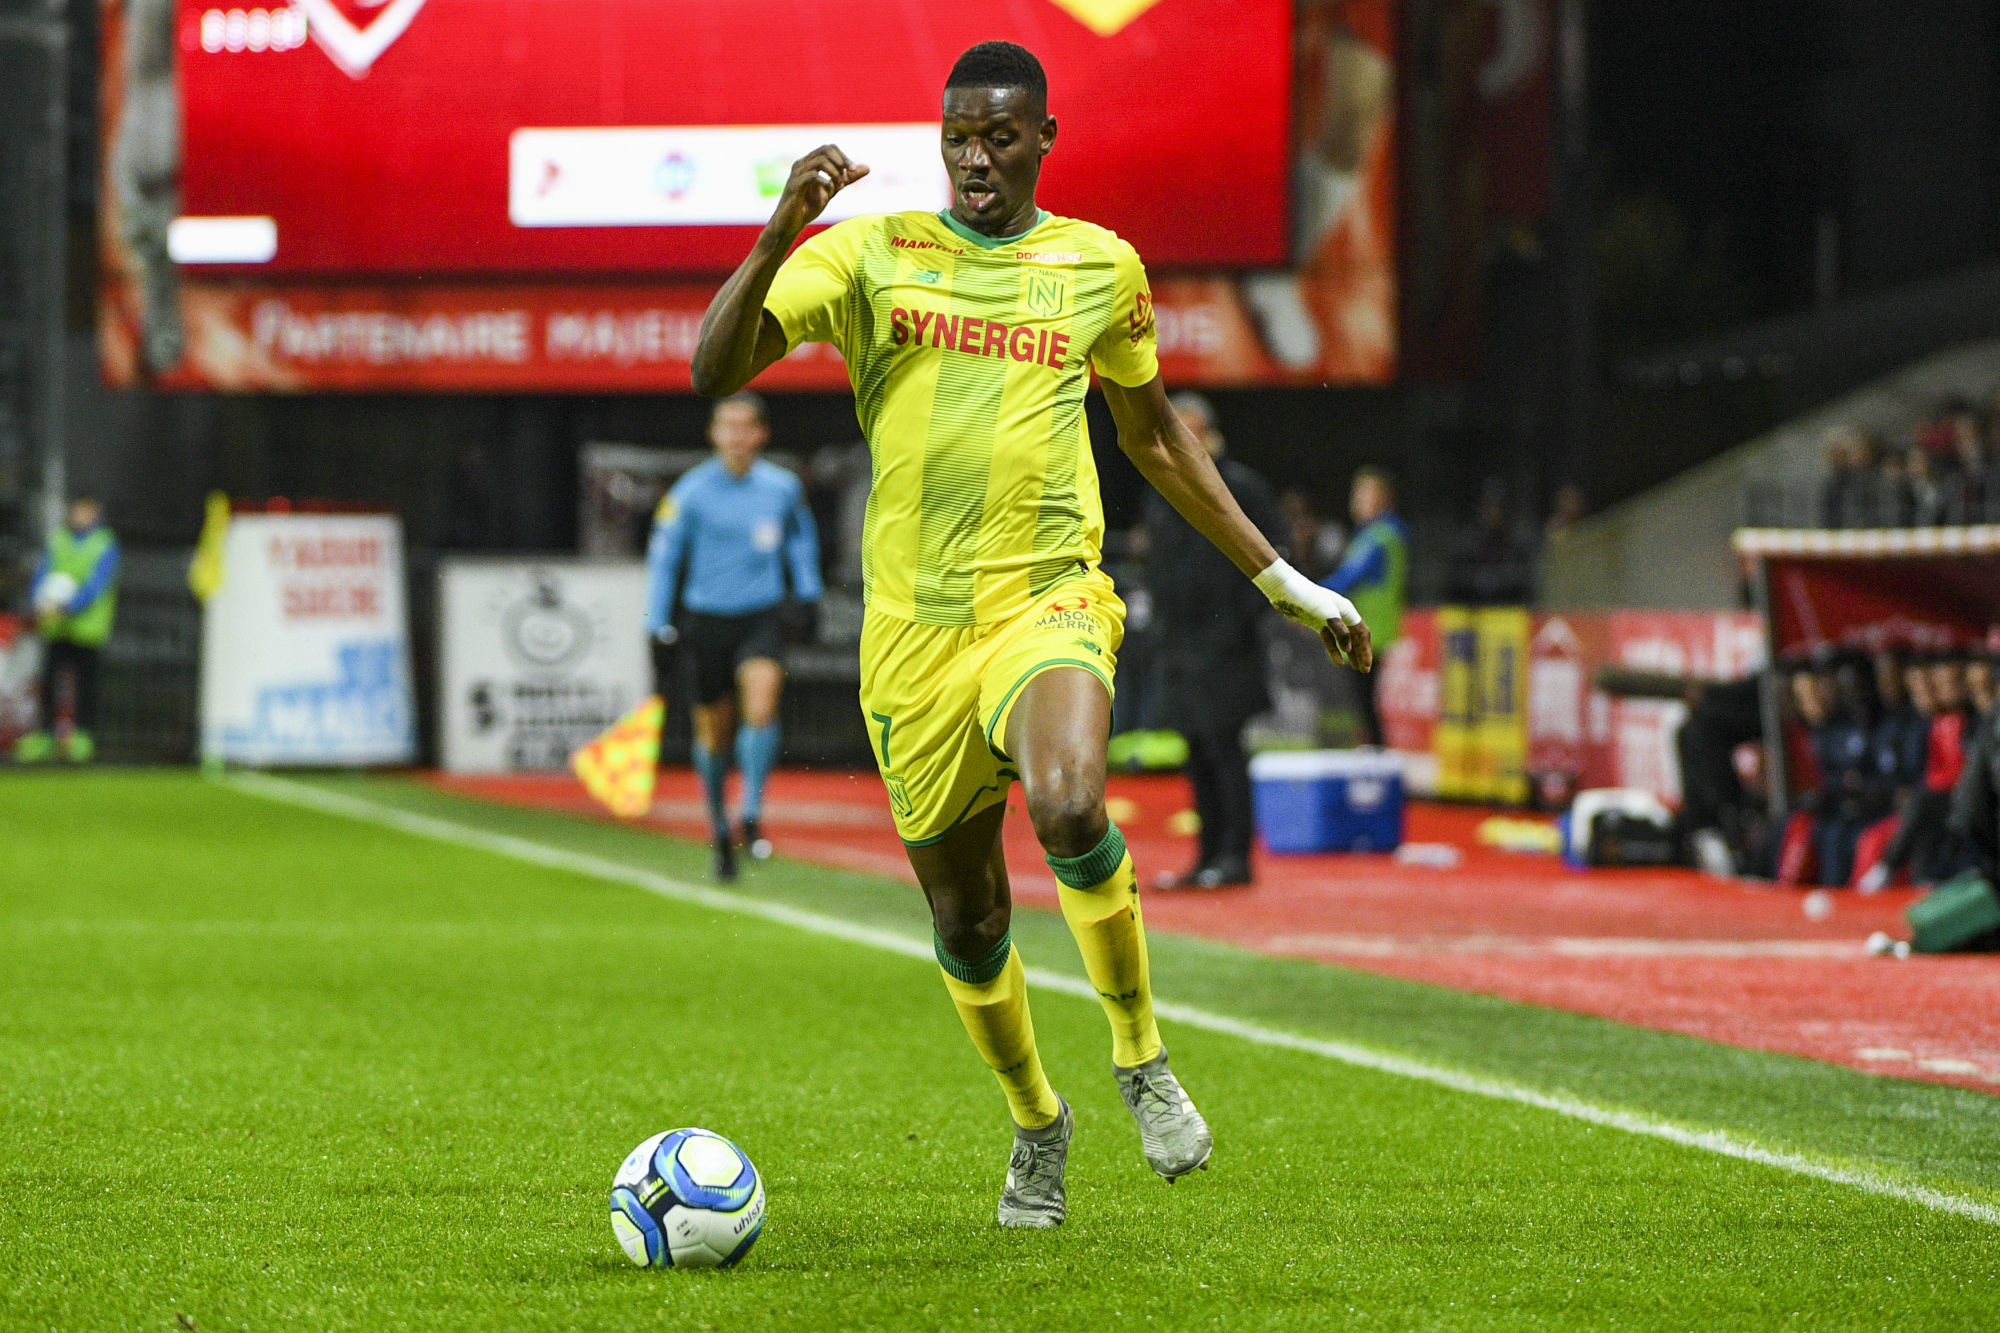 Kalifa COULIBALY of Nantes during the Ligue 1 match between Stade Brestois 29 and FC Nantes on November 23, 2019 in Brest, France. (Photo by Aude Alcover/Icon Sport) - Kalifa COULIBALY - Stade Francis-Le-Blé - Brest (France)